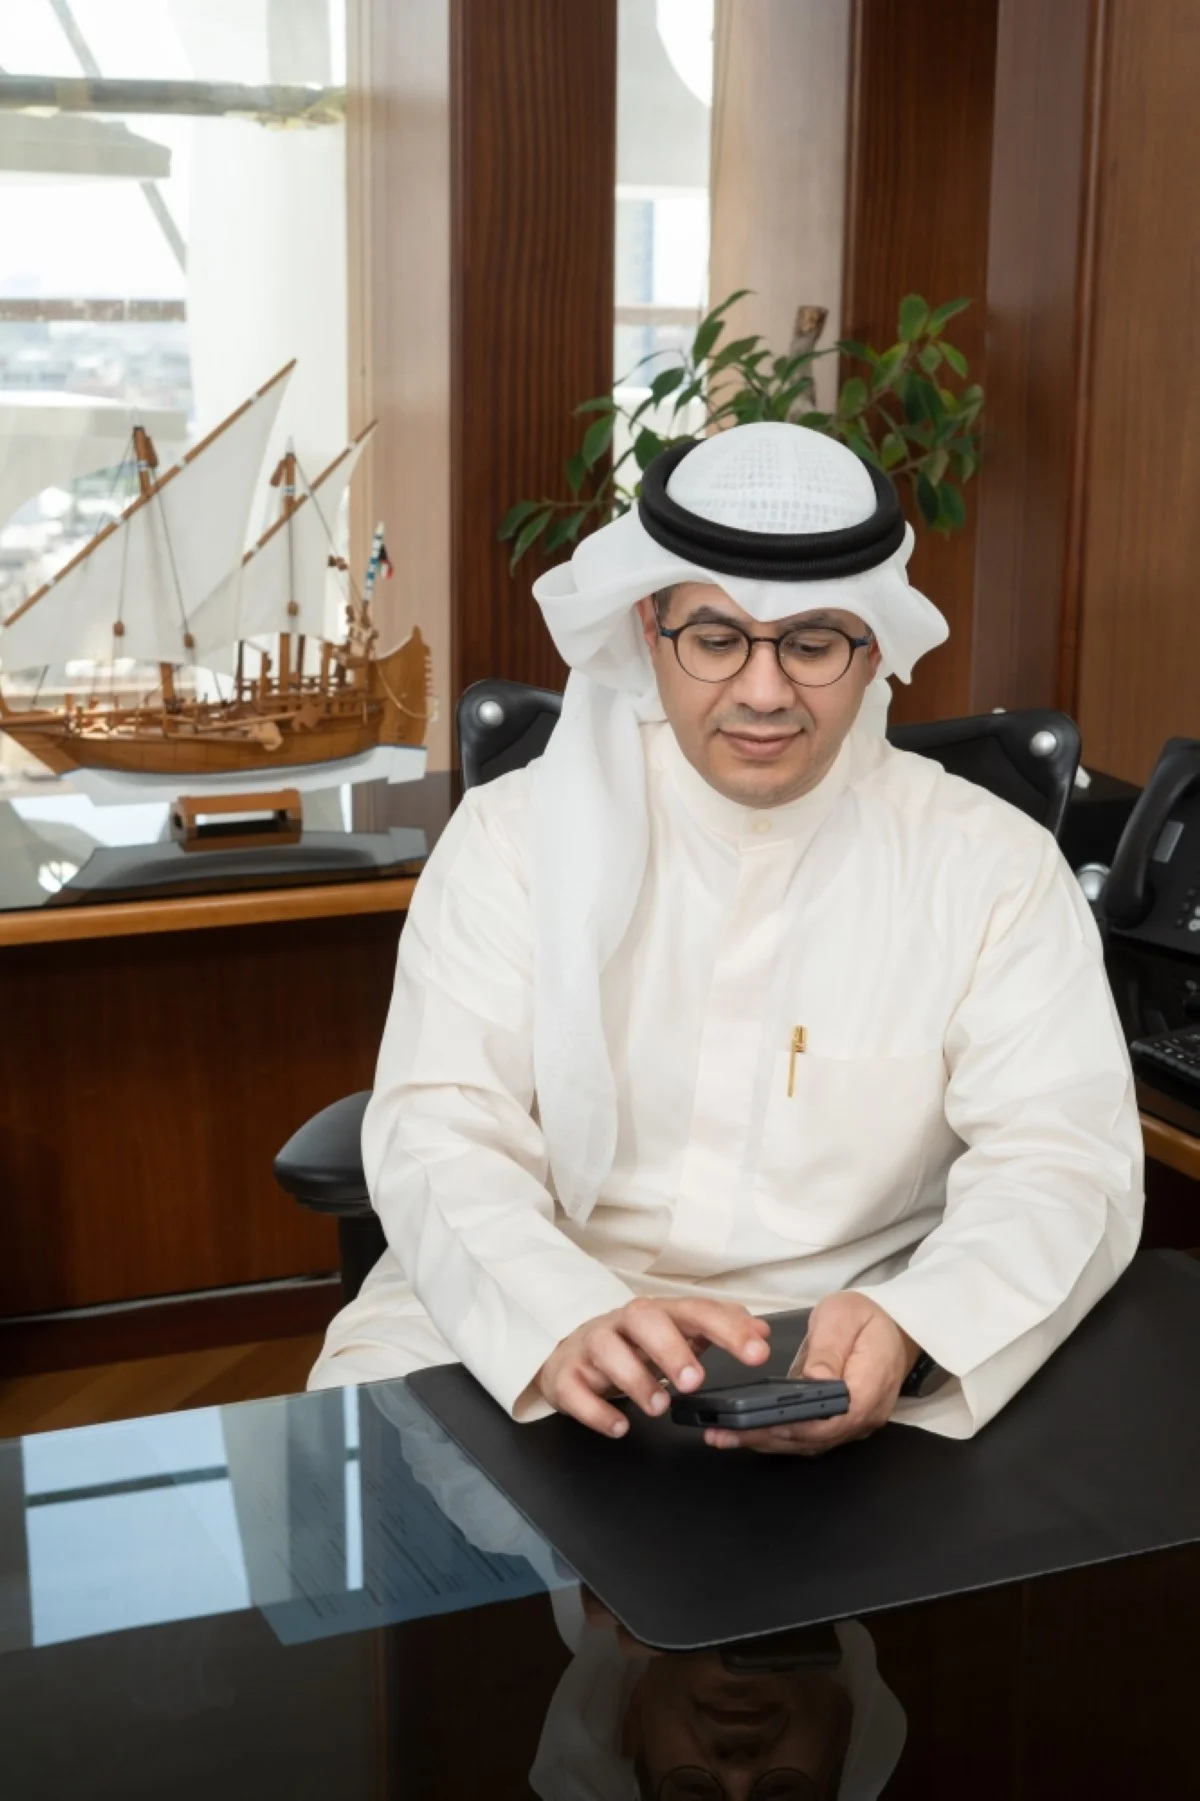 Mohammad Al-Qattan reviewing the quality services on the mobile app.